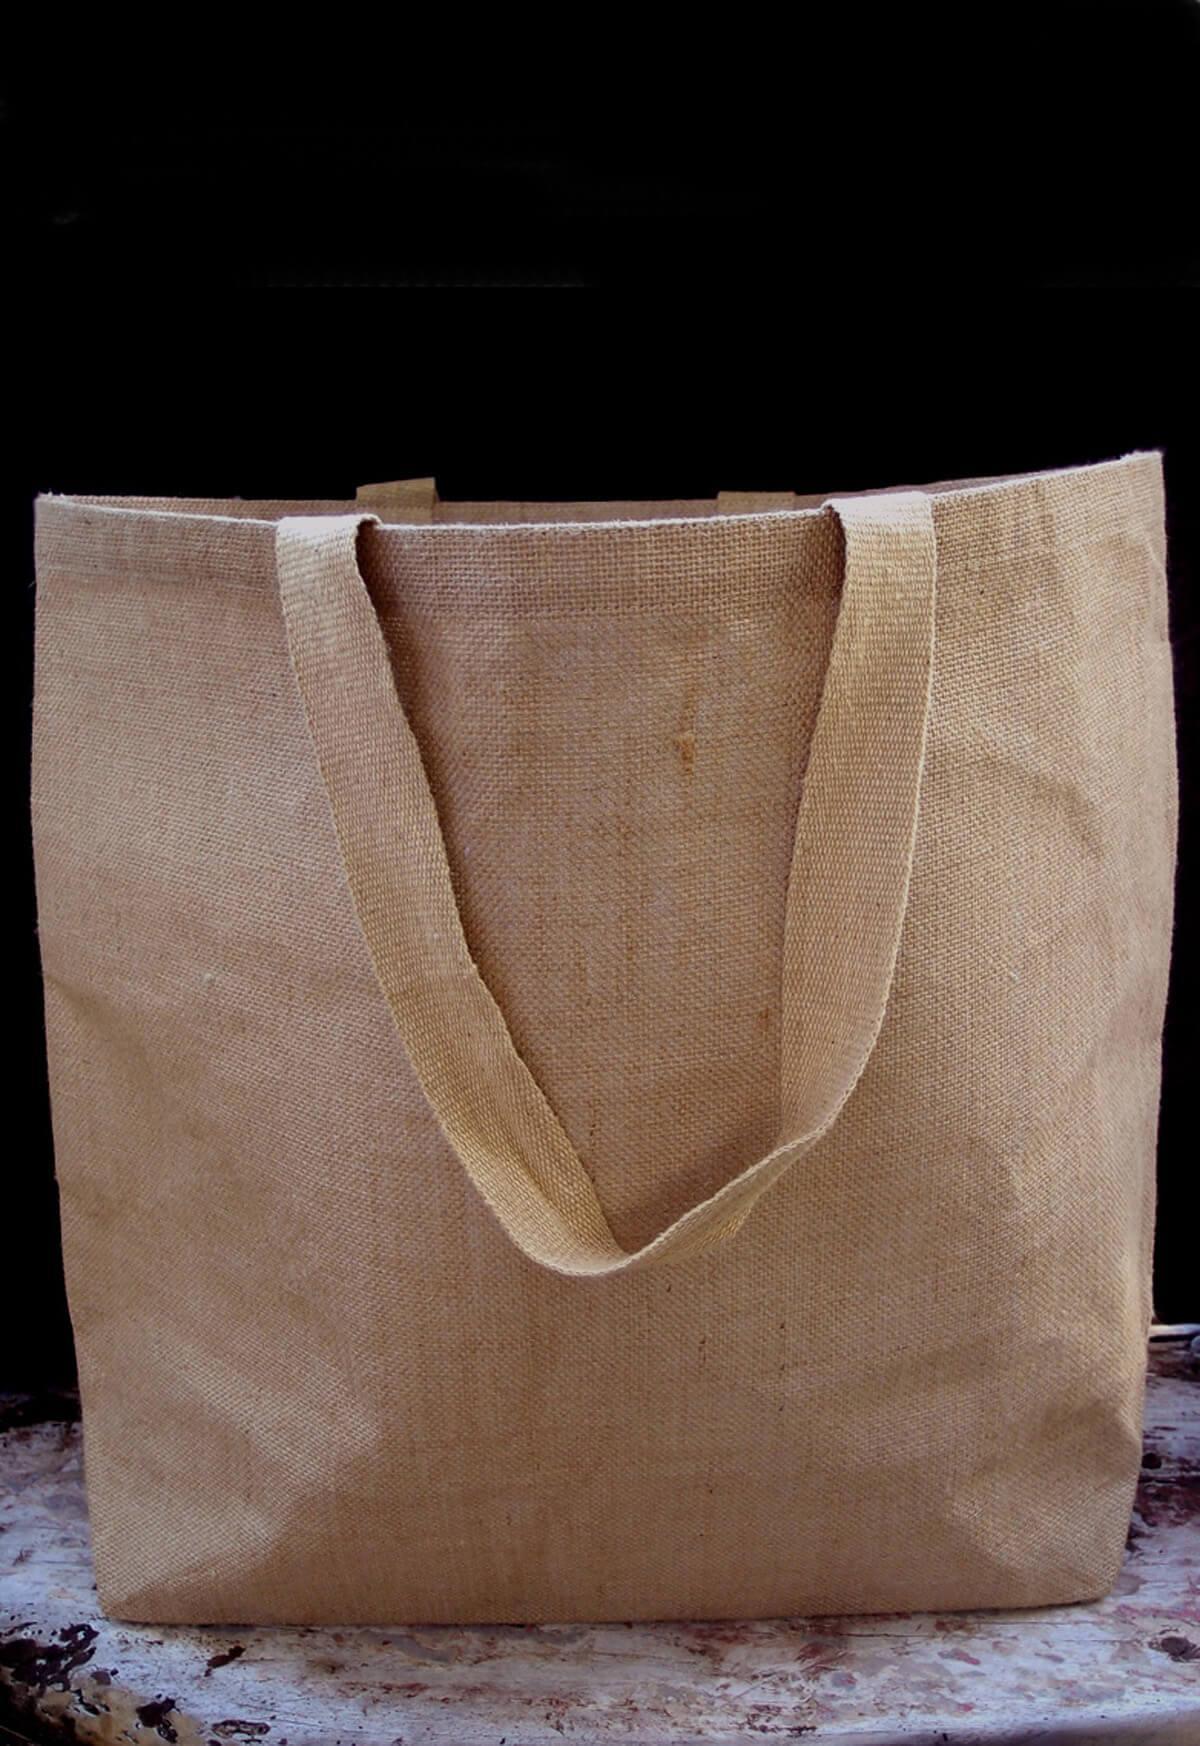 Large 20" Burlap Tote Bag with Cotton Lining / Handles